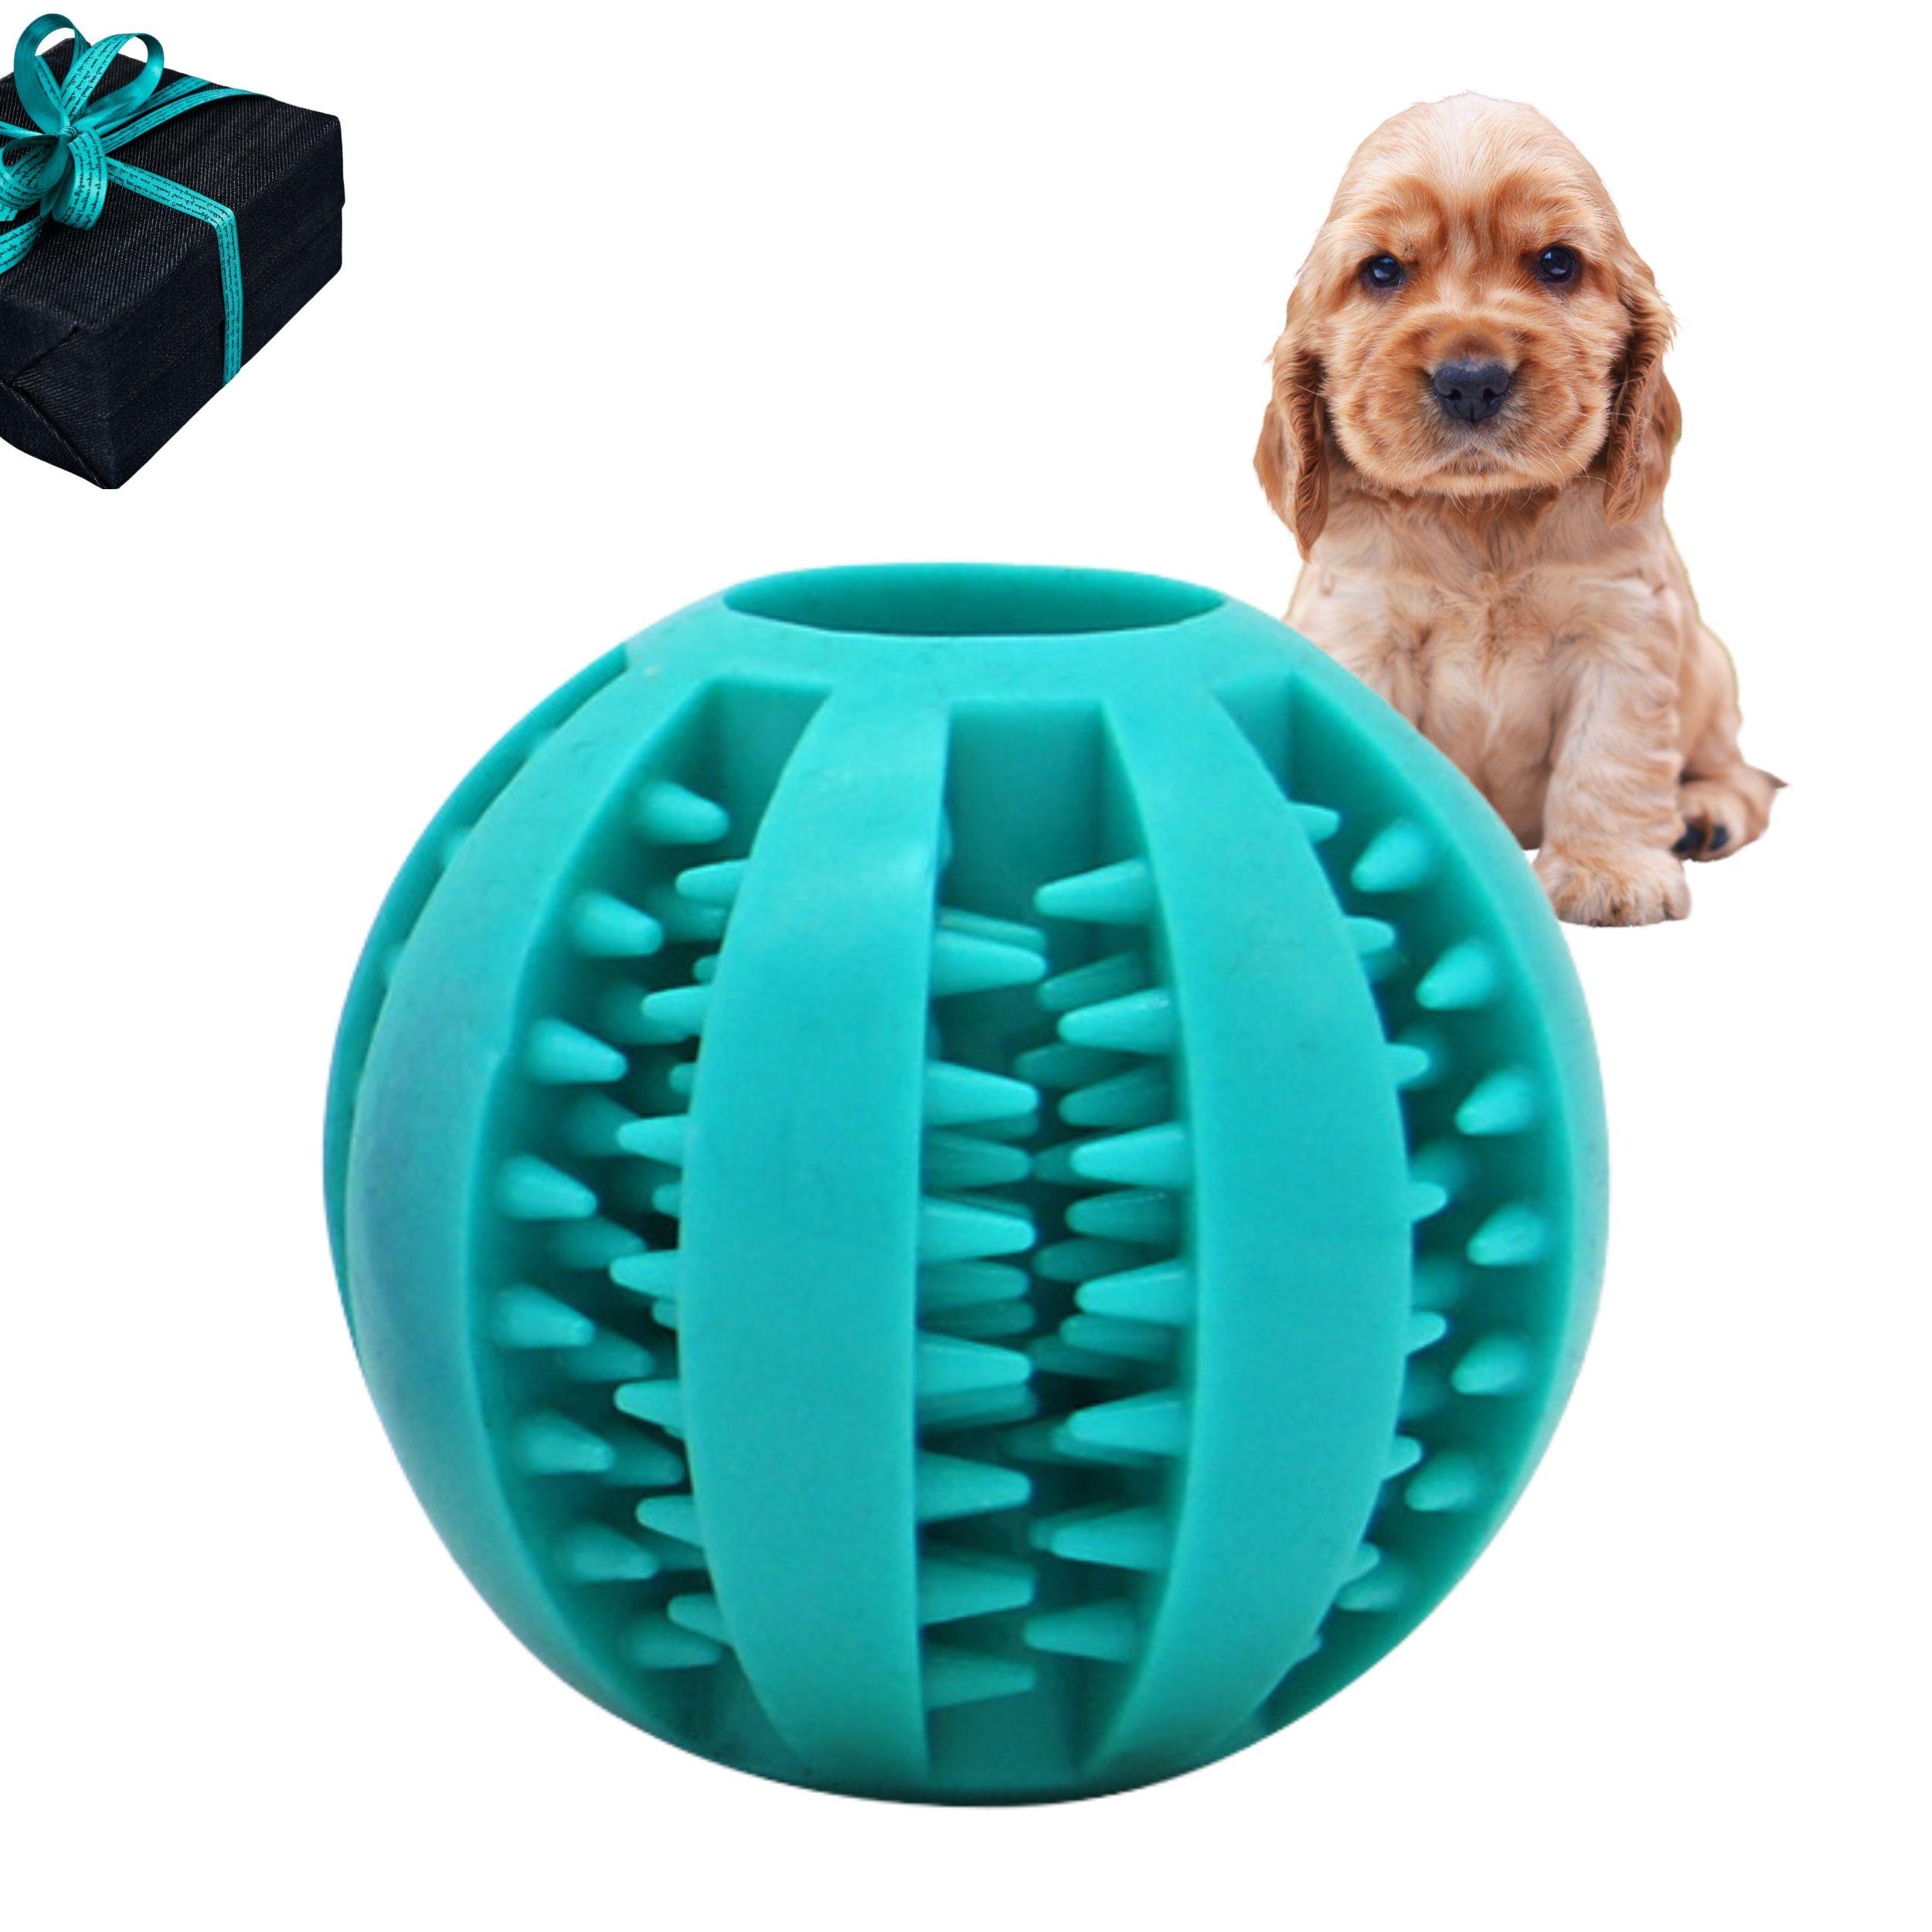 Dog chew toy with holes for treats - blue